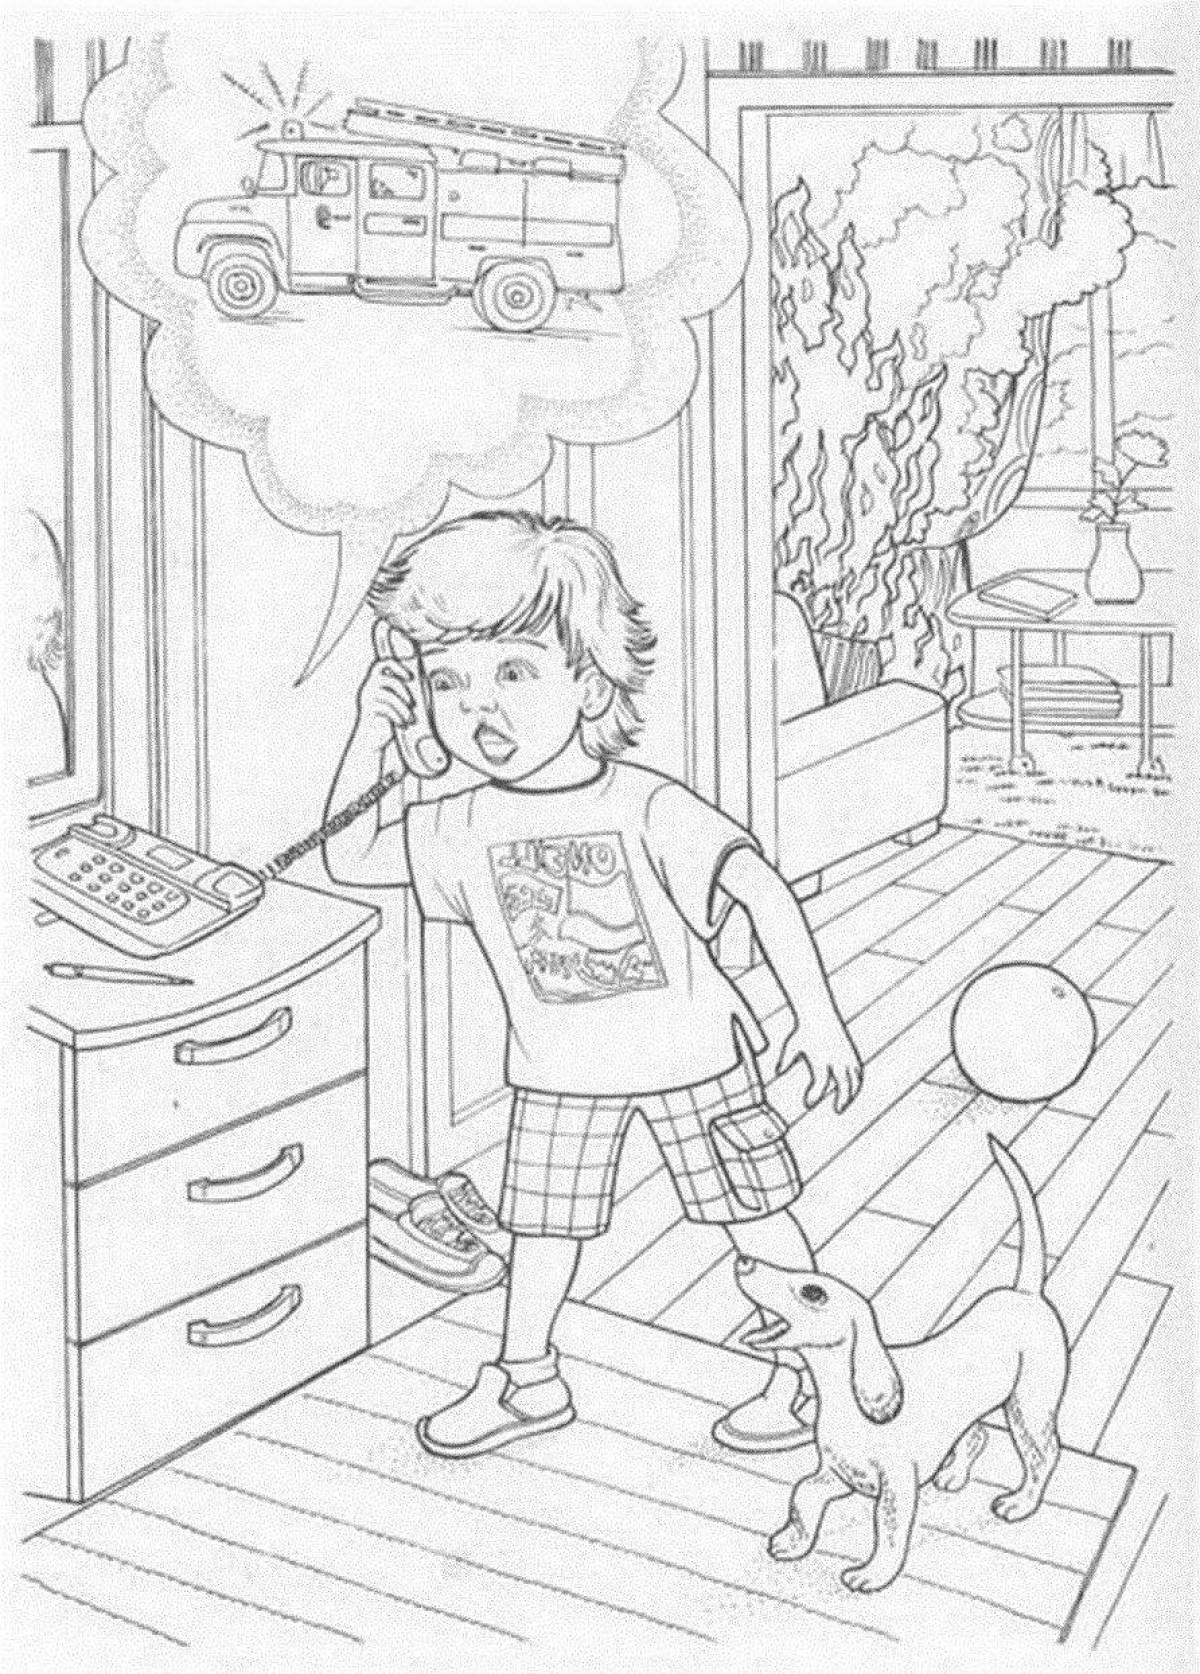 Comic fire safety coloring page